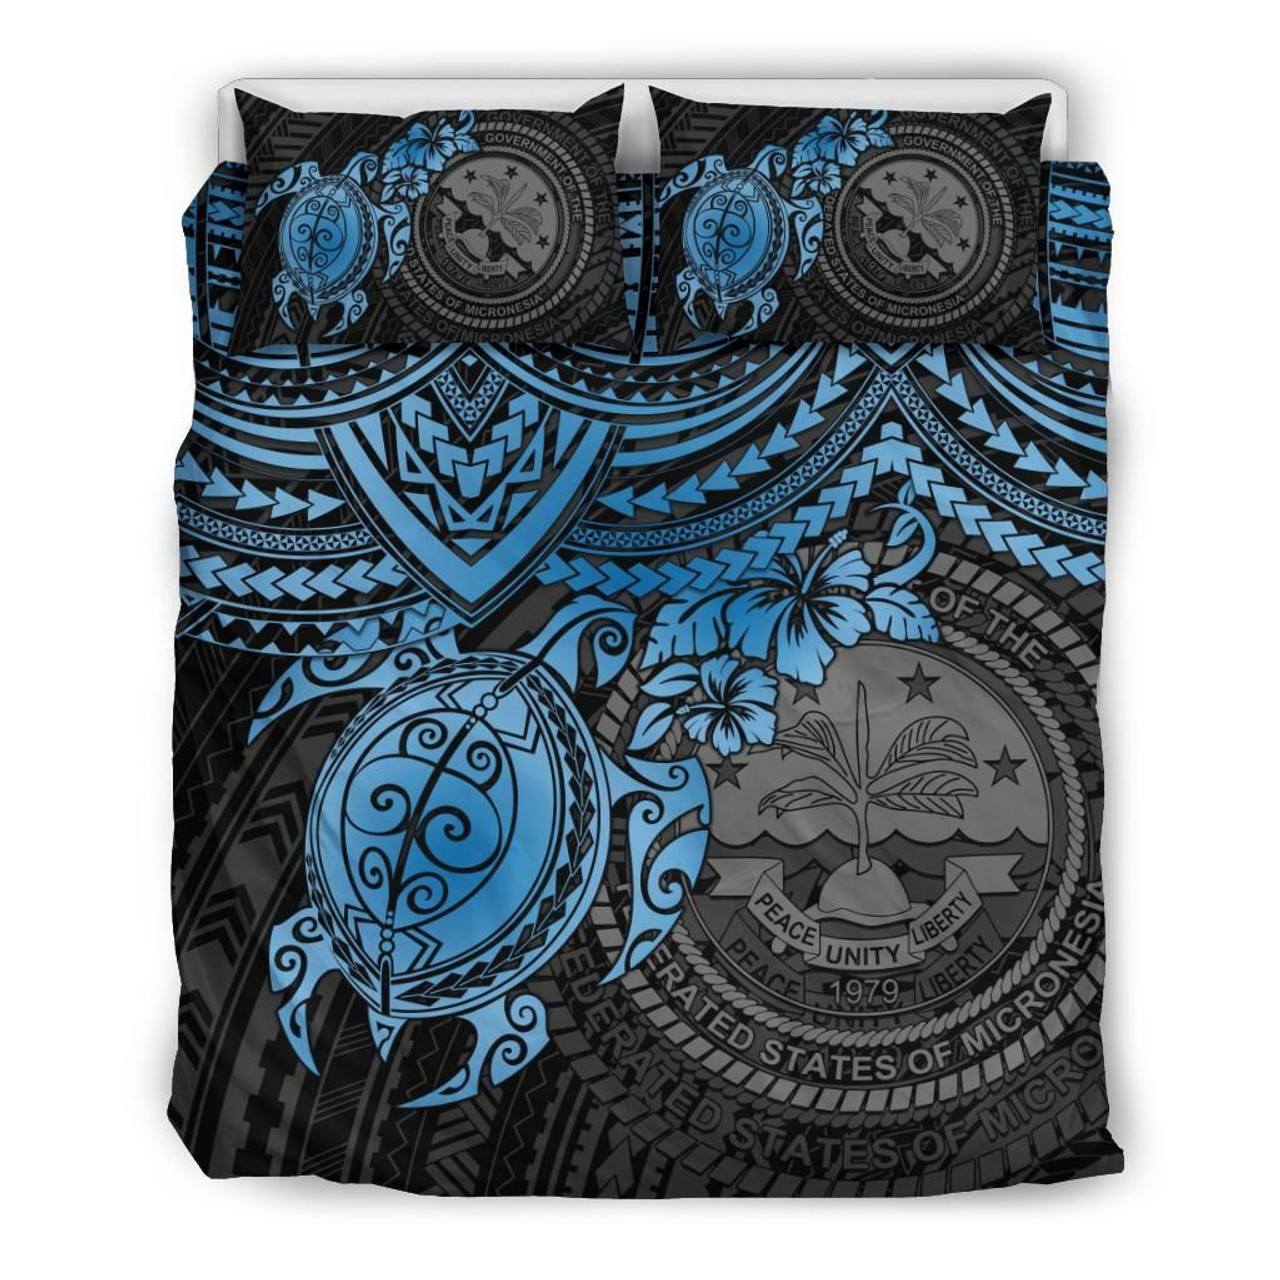 Federated States Of Micronesia Duvet Cover Set - Blue Turtle 3